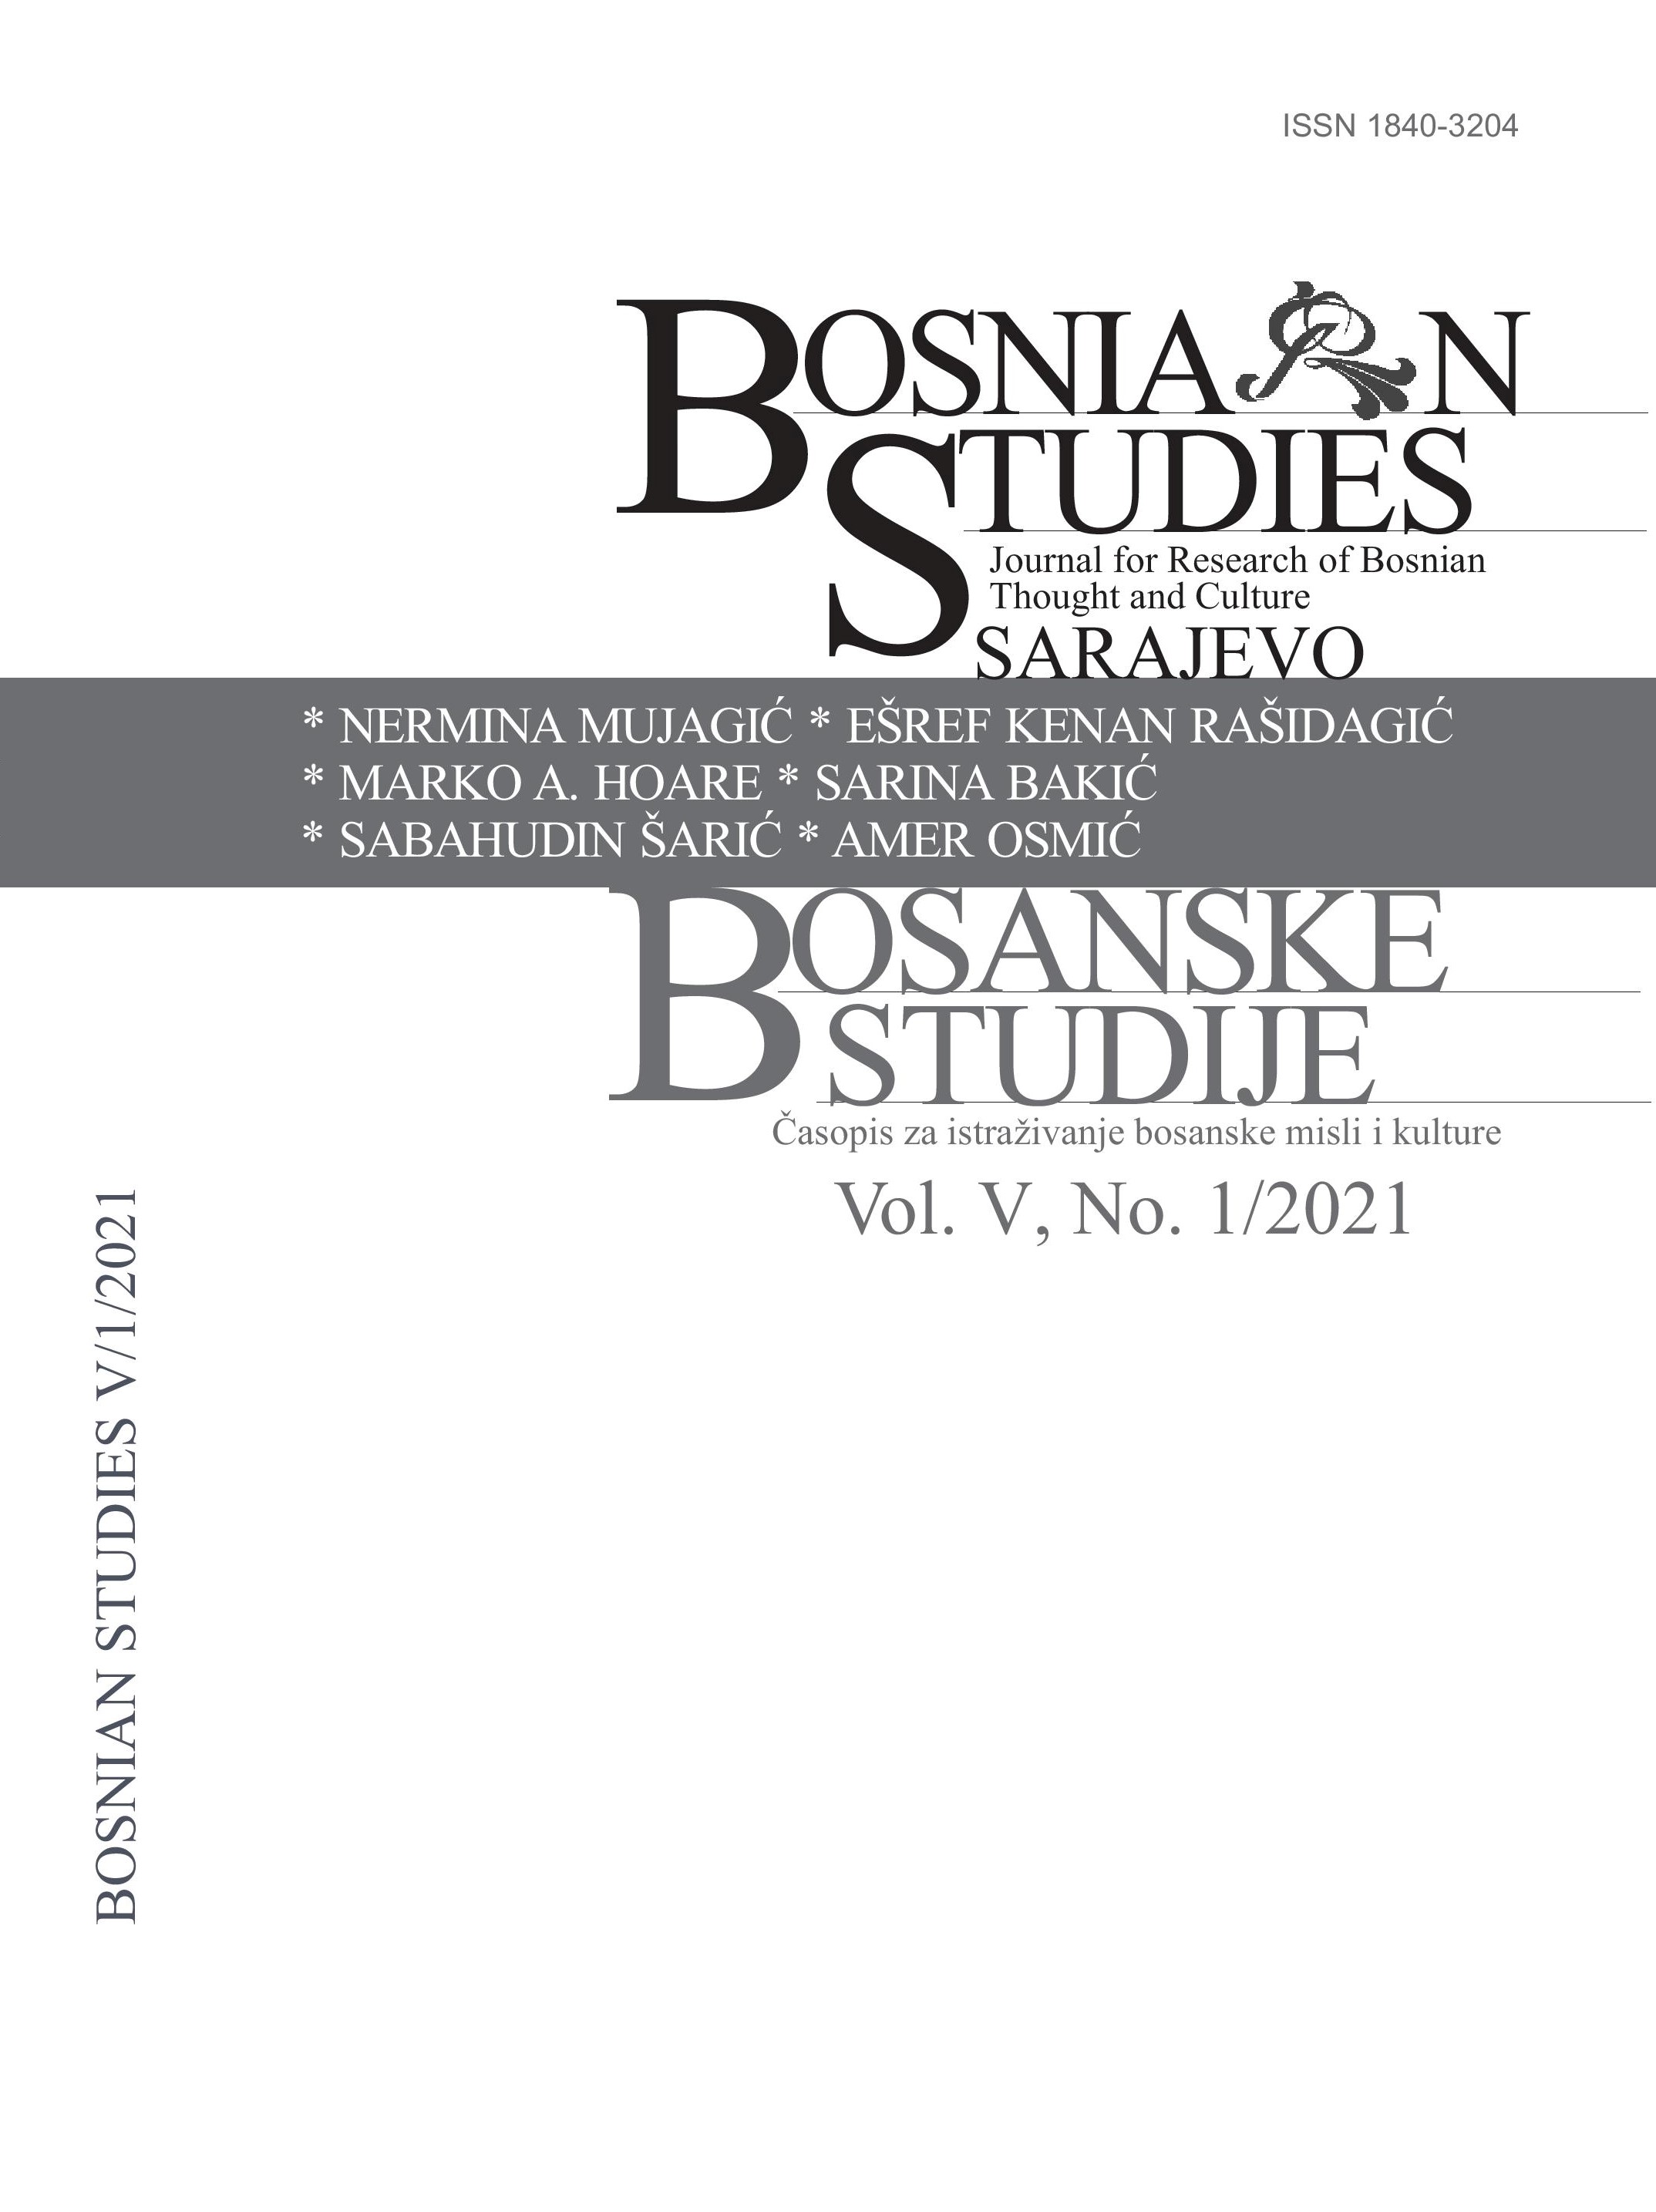 "Bosnianness Or Anti-Bosnianness, That Is the Question". A Discourse On Bosnianess by Senadin Lavić, Faculty of Political Sciences (2020)